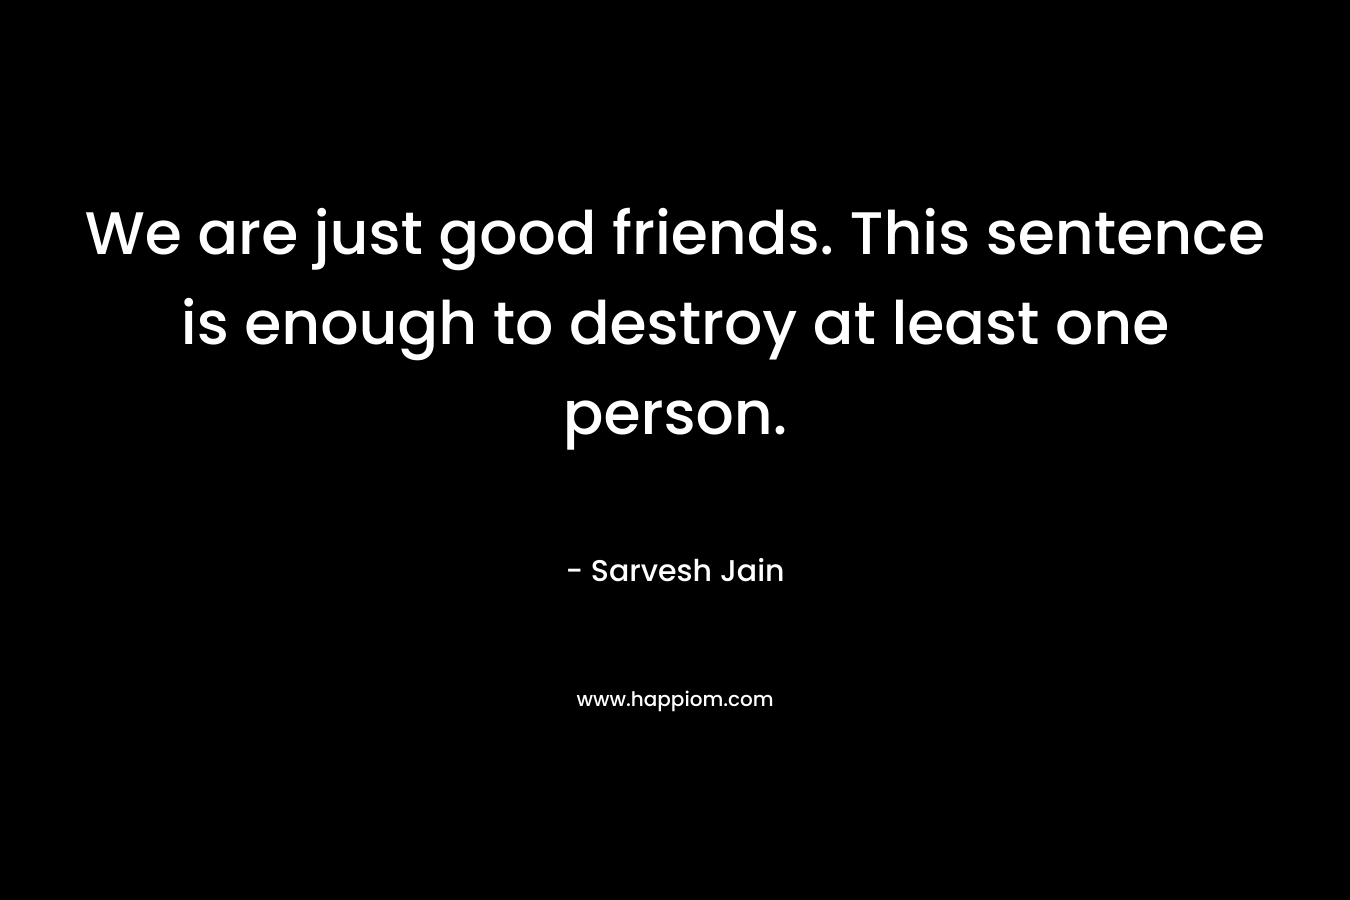 We are just good friends. This sentence is enough to destroy at least one person. – Sarvesh Jain